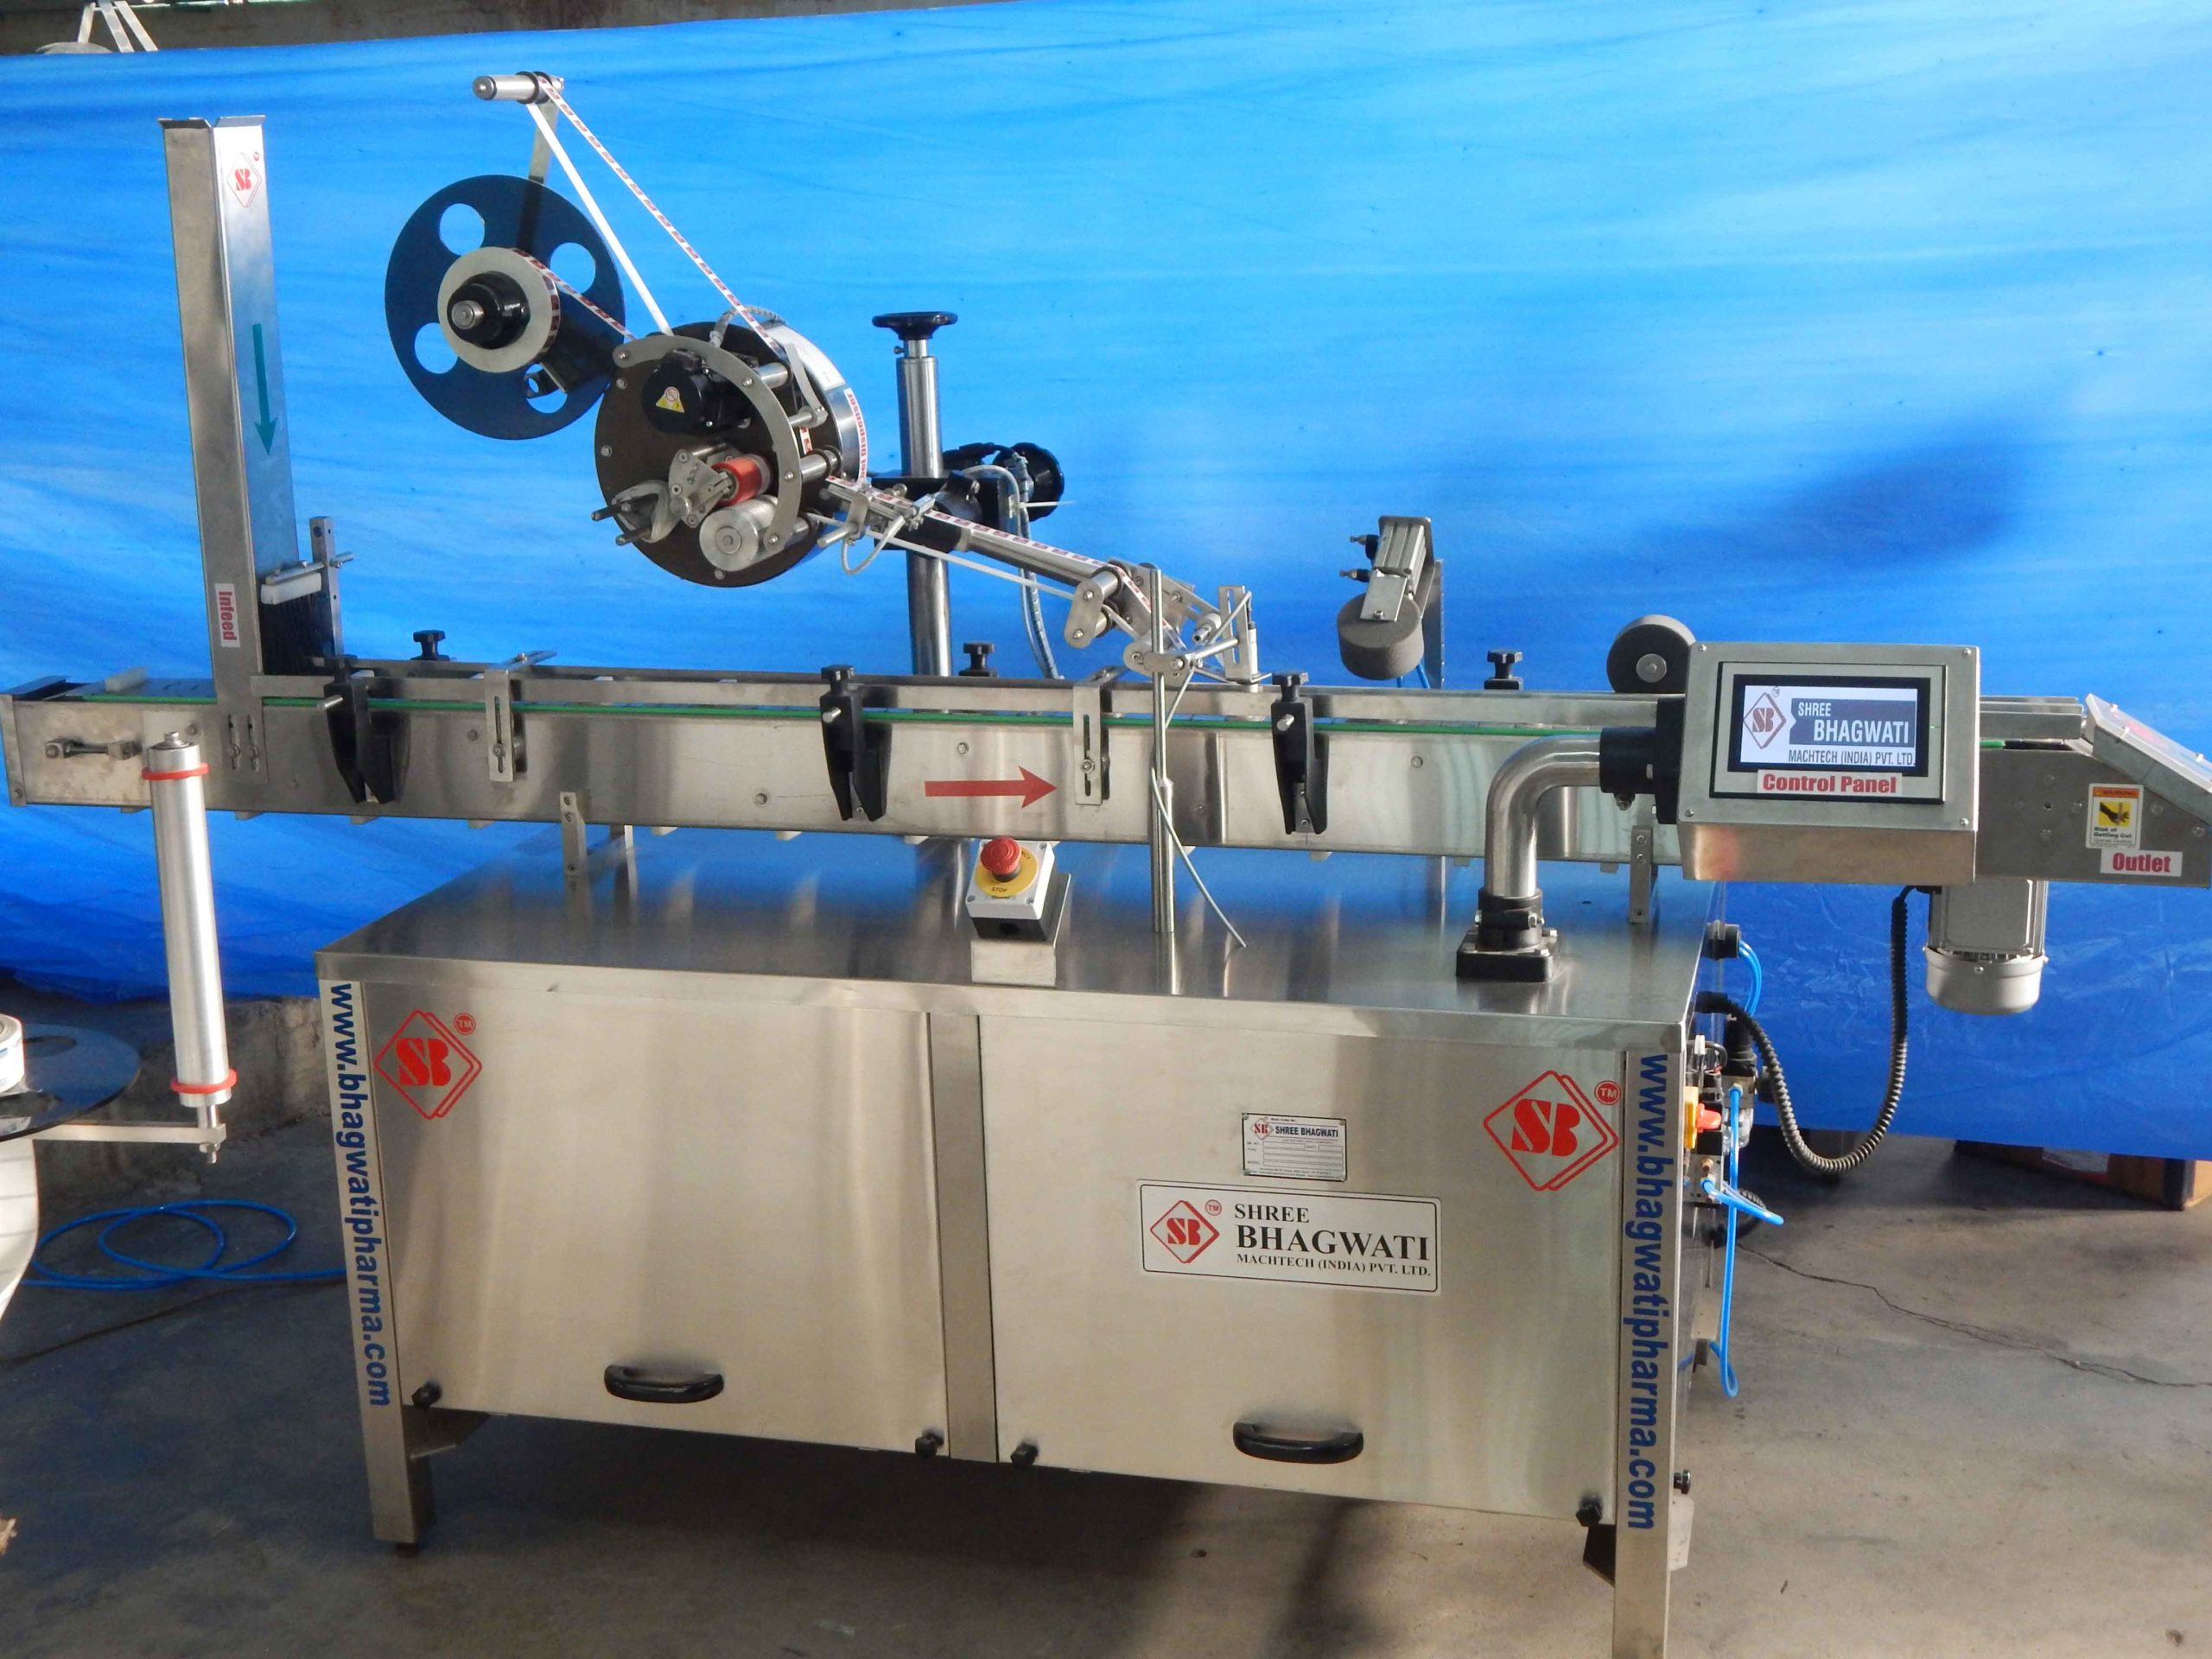 Top Side Labeling Machine